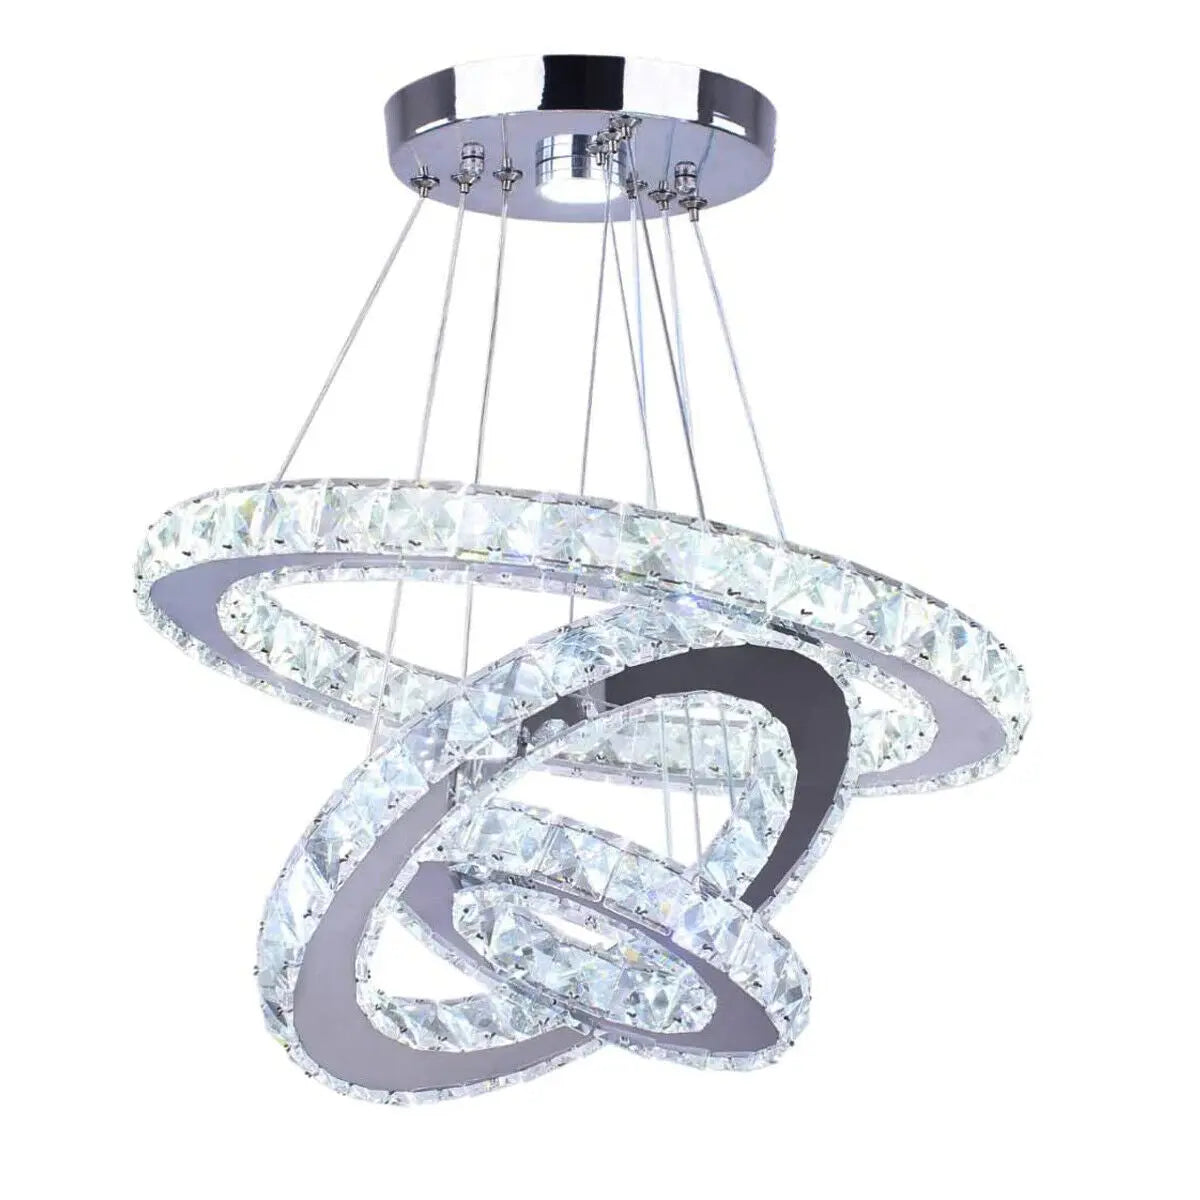 Modern Crystal Chandeliers Lighting Pendant Ceiling Lamp with 3